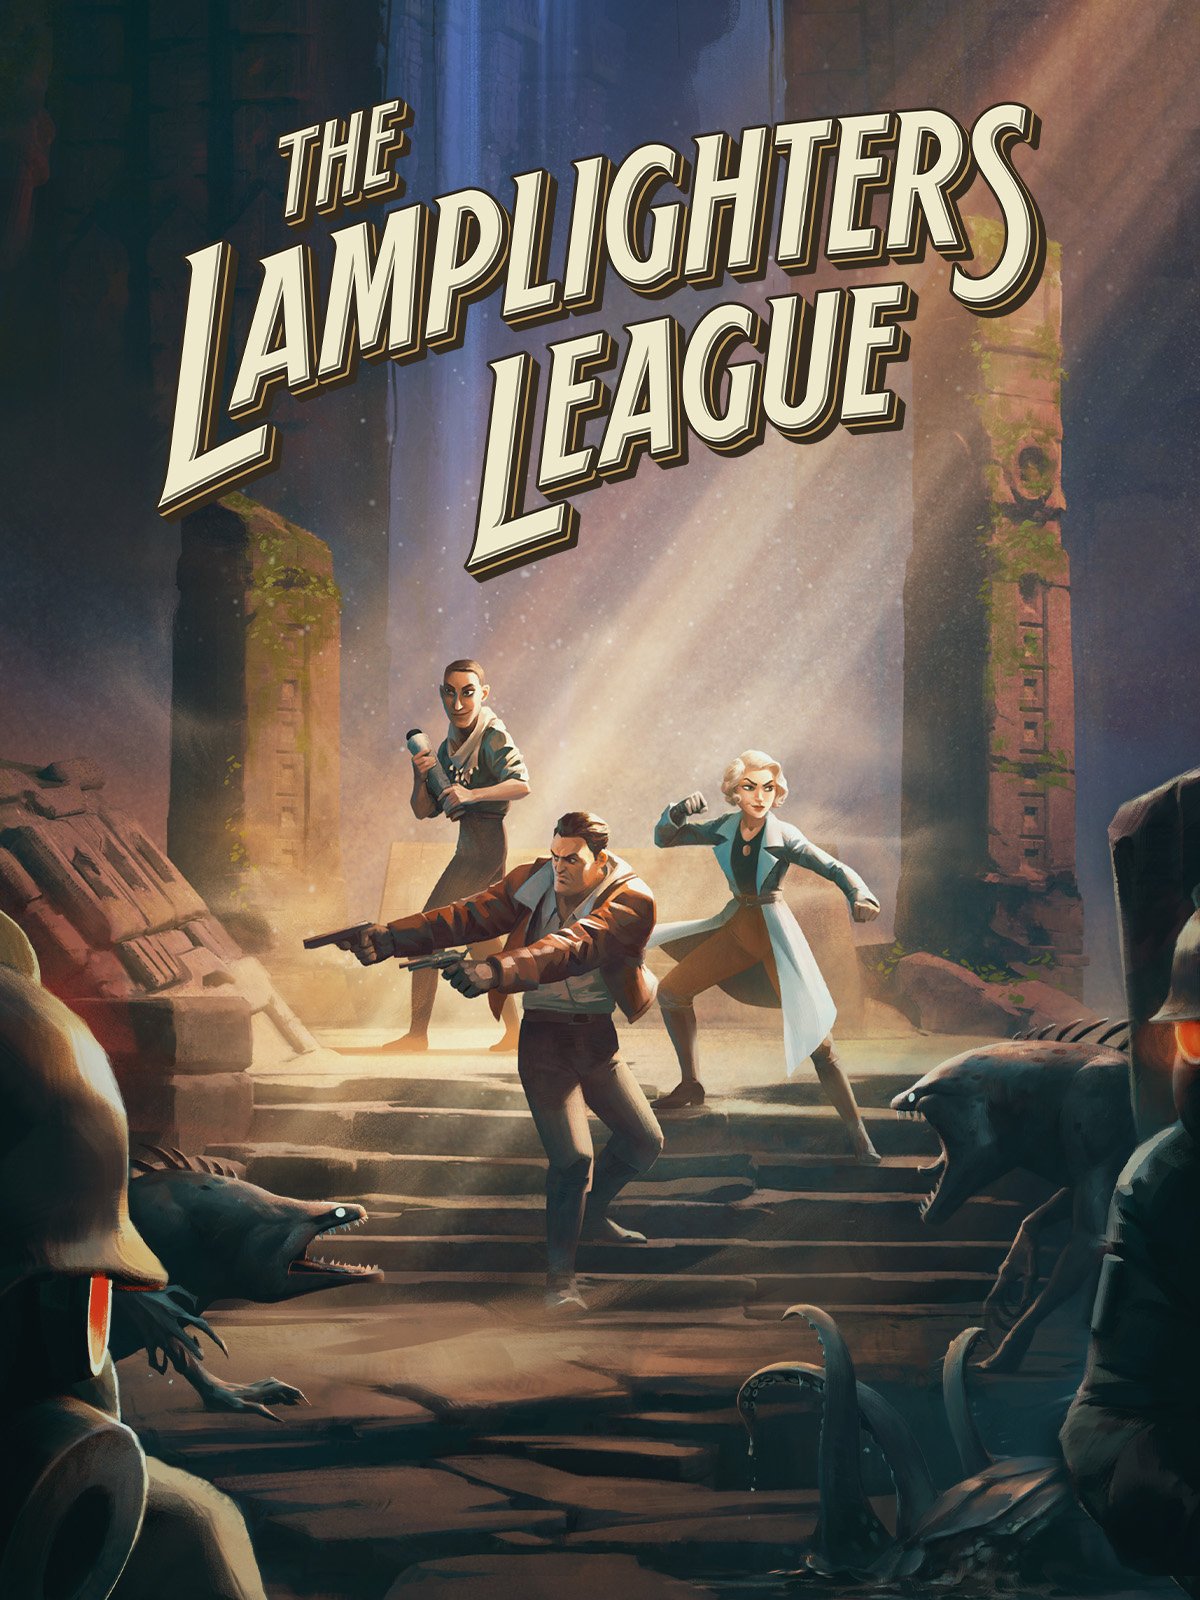 The Lamplighters League download the last version for ios